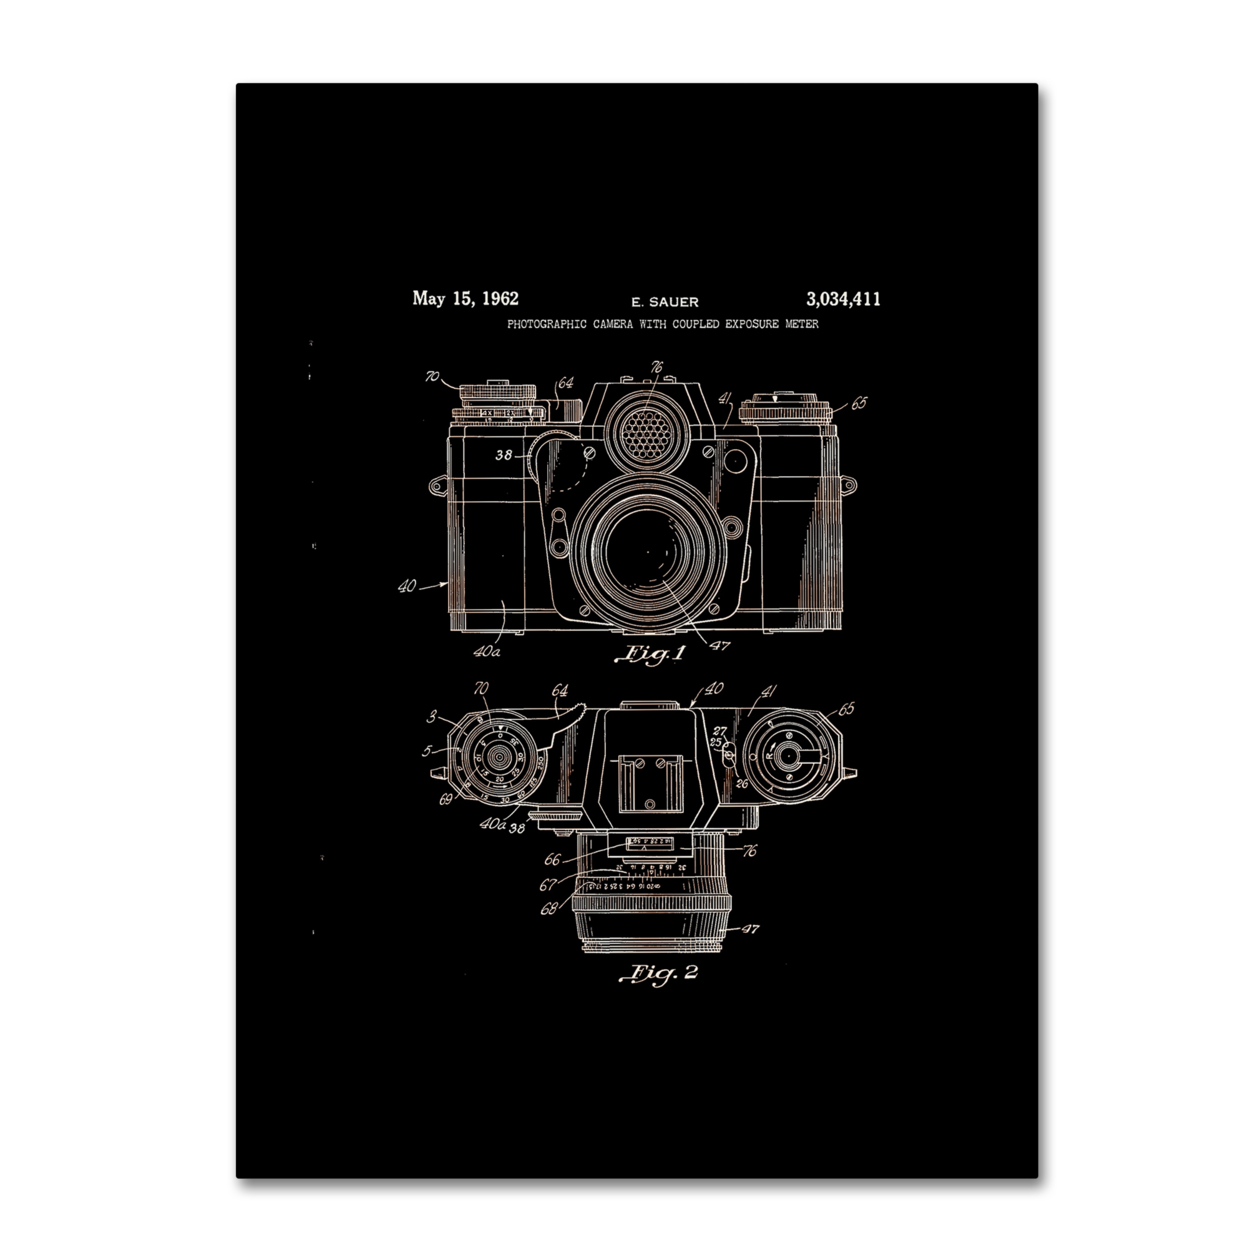 Claire Doherty 'Photographic Camera Patent 1962 Black' Canvas Wall Art 35 X 47 Inches